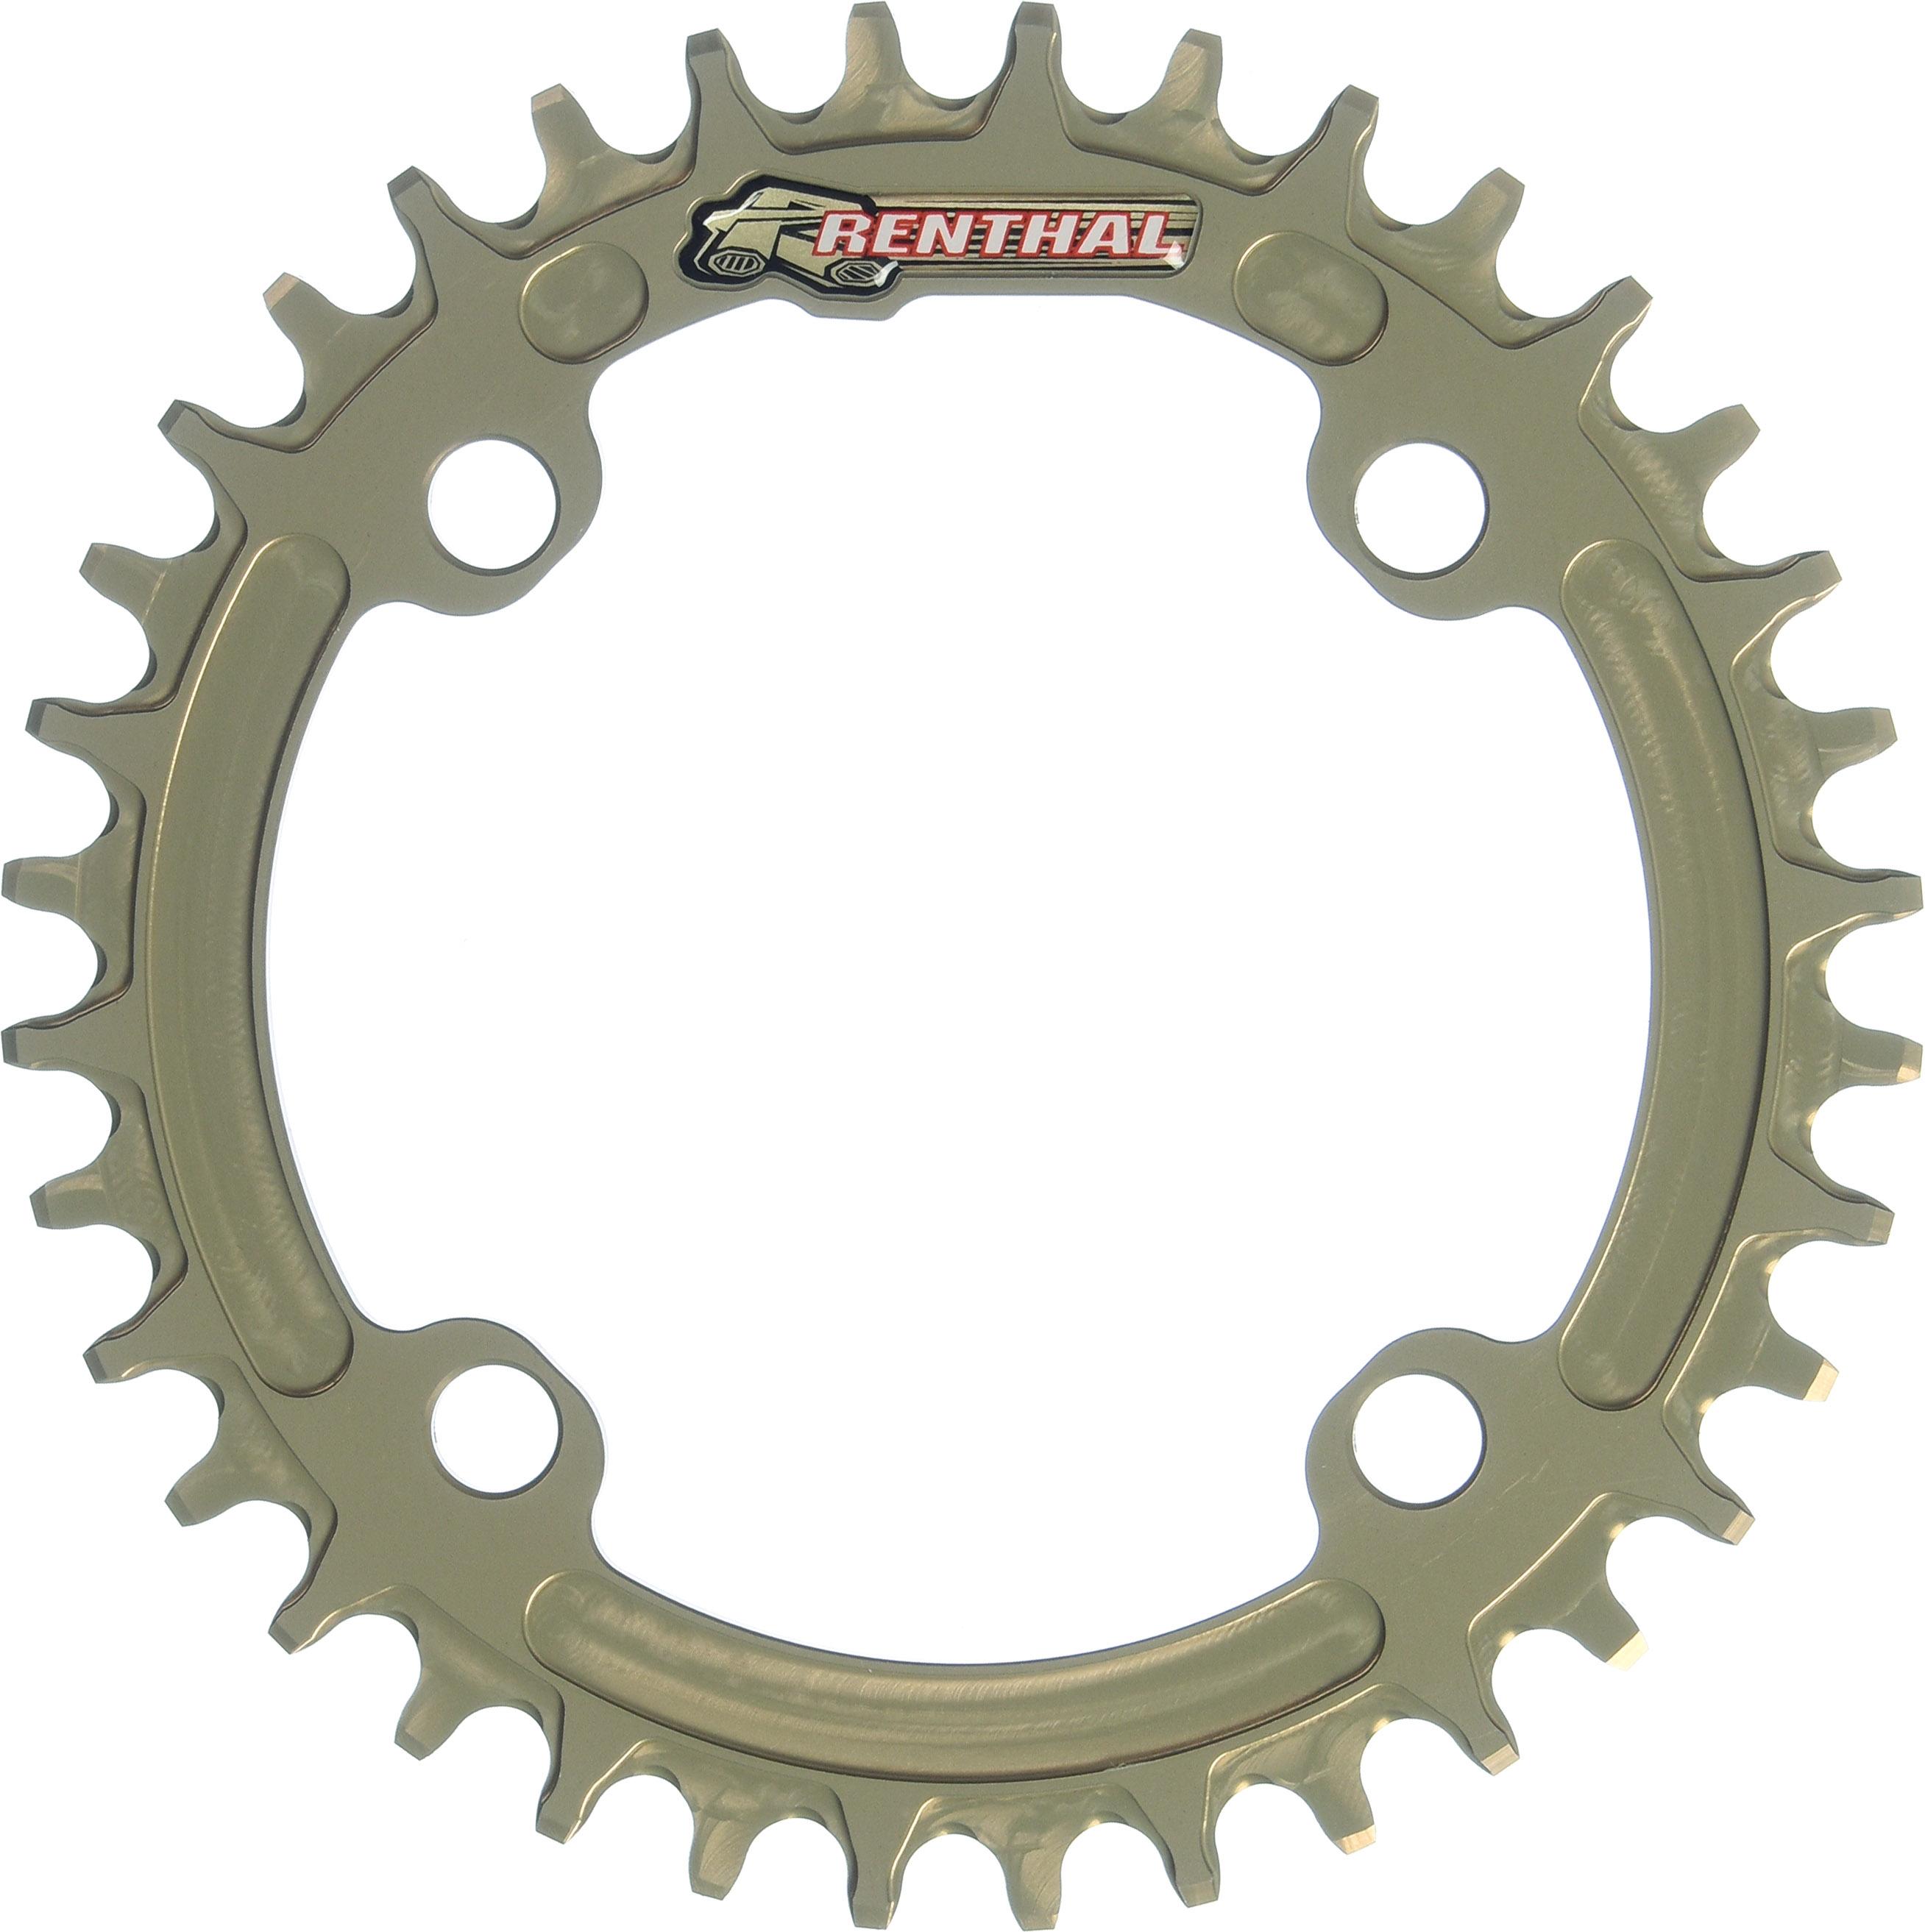 Renthal 1xr Narrow Wide Chainring - Gold